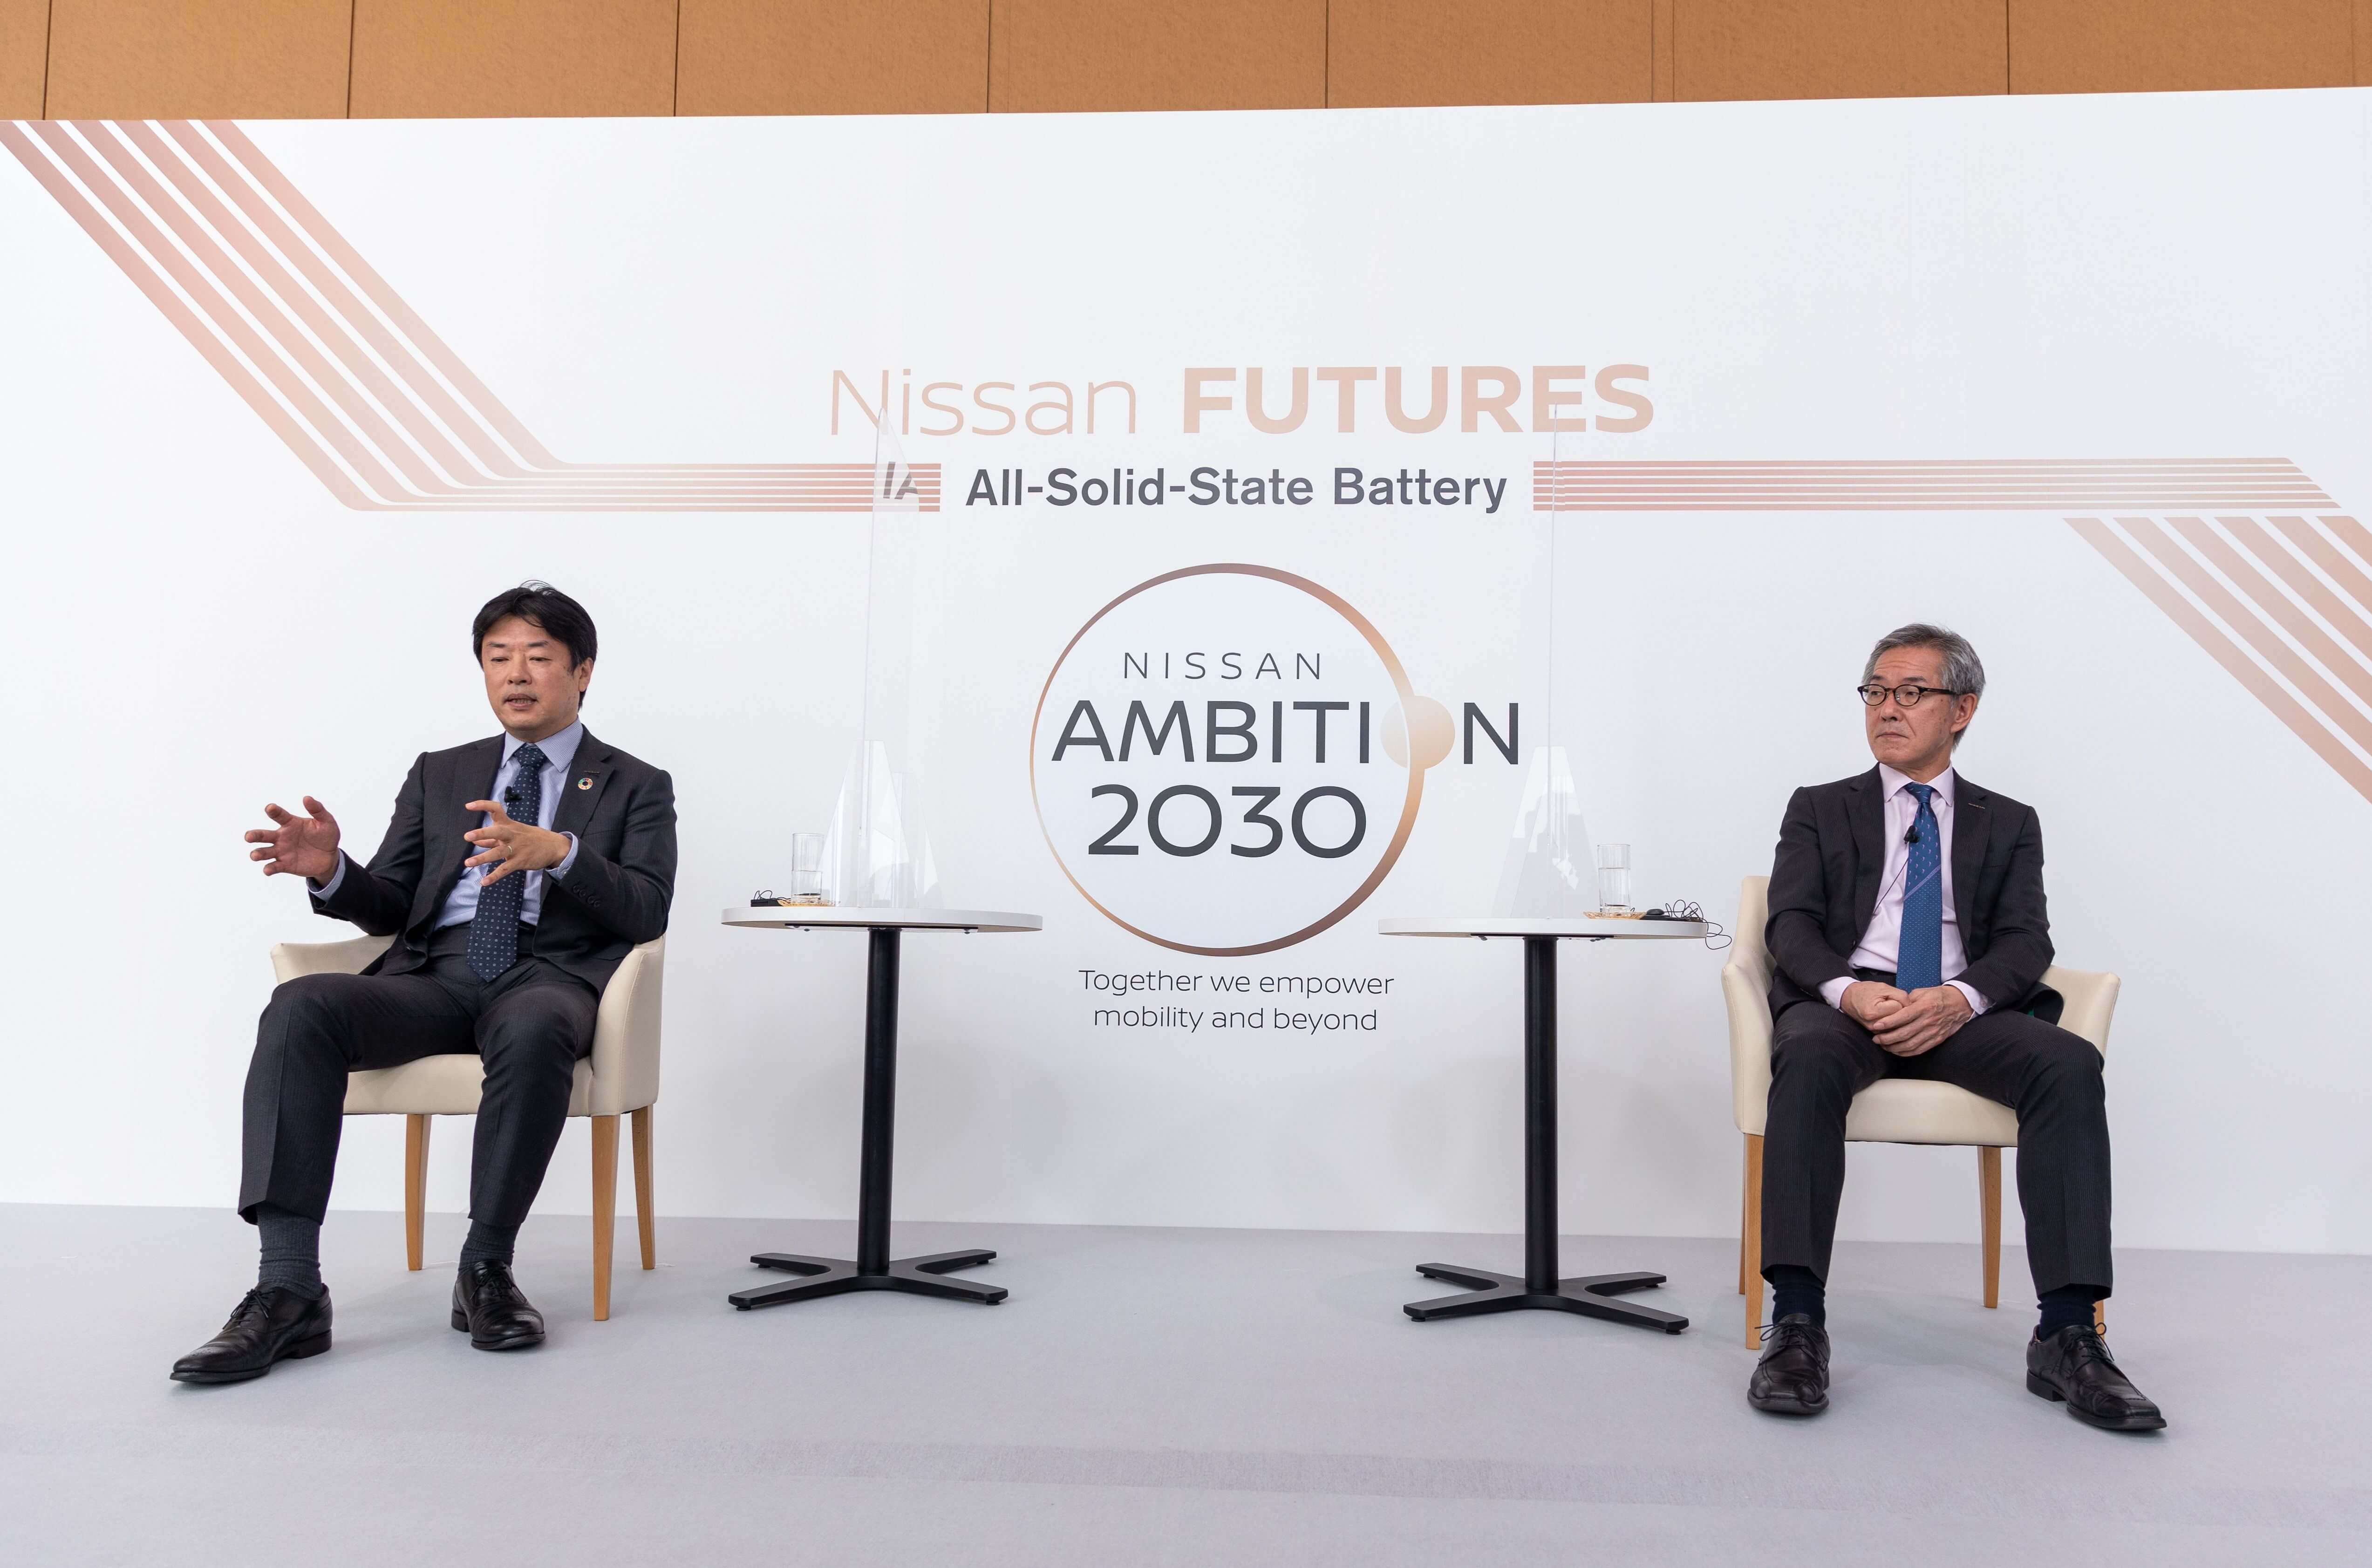 Nissan unveils prototype production facility for all-solid-state batteries